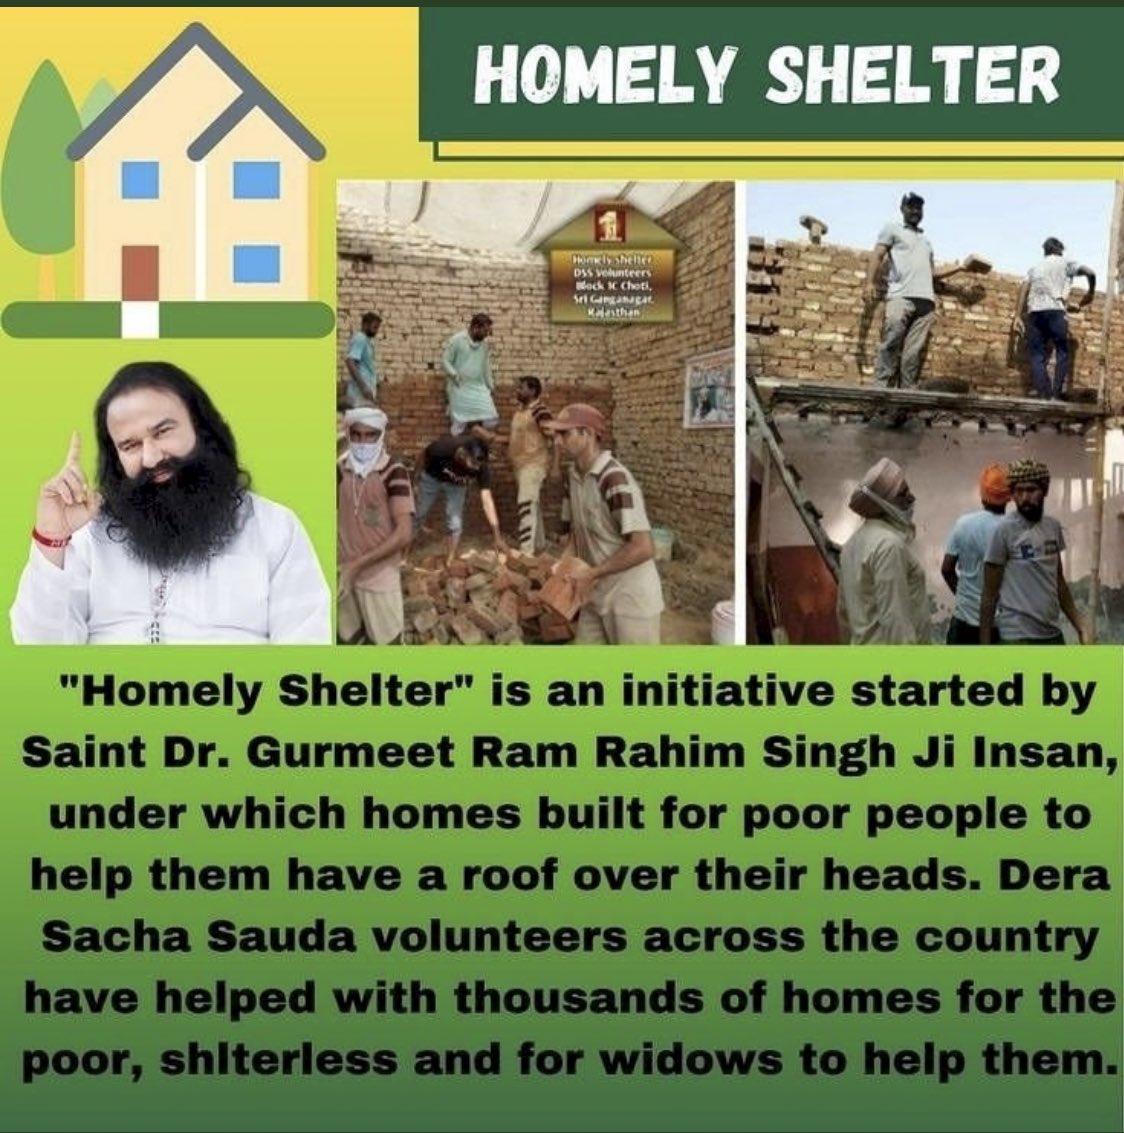 Due to certain Circumstances, Many Destitute People become Homeless Or Live in Poor Conditions. To Help such People, Dera Sacha Sauda Started 'Homely Shelter' Initiative with the guidance of Saint Gurmeet Ram Rahim Ji 
#HelpTheHomeless